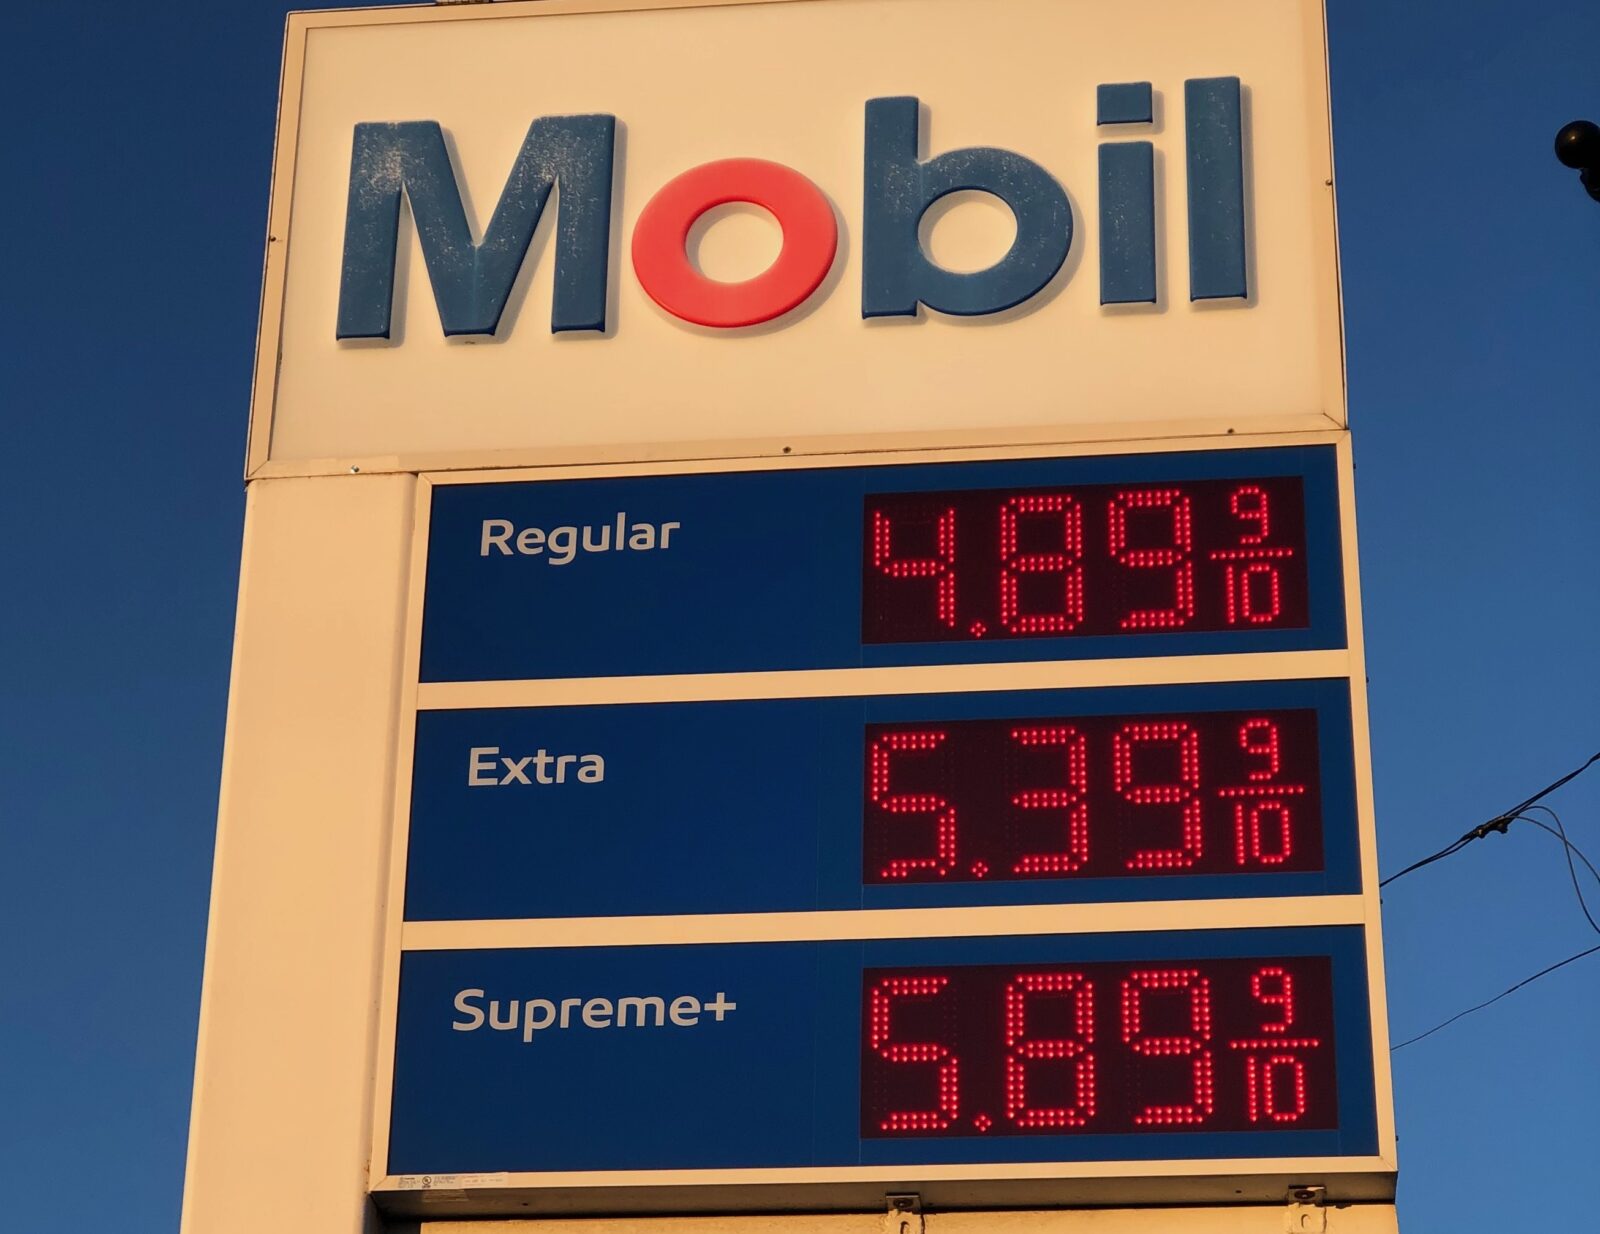 How long do you think gas prices will stay this low?